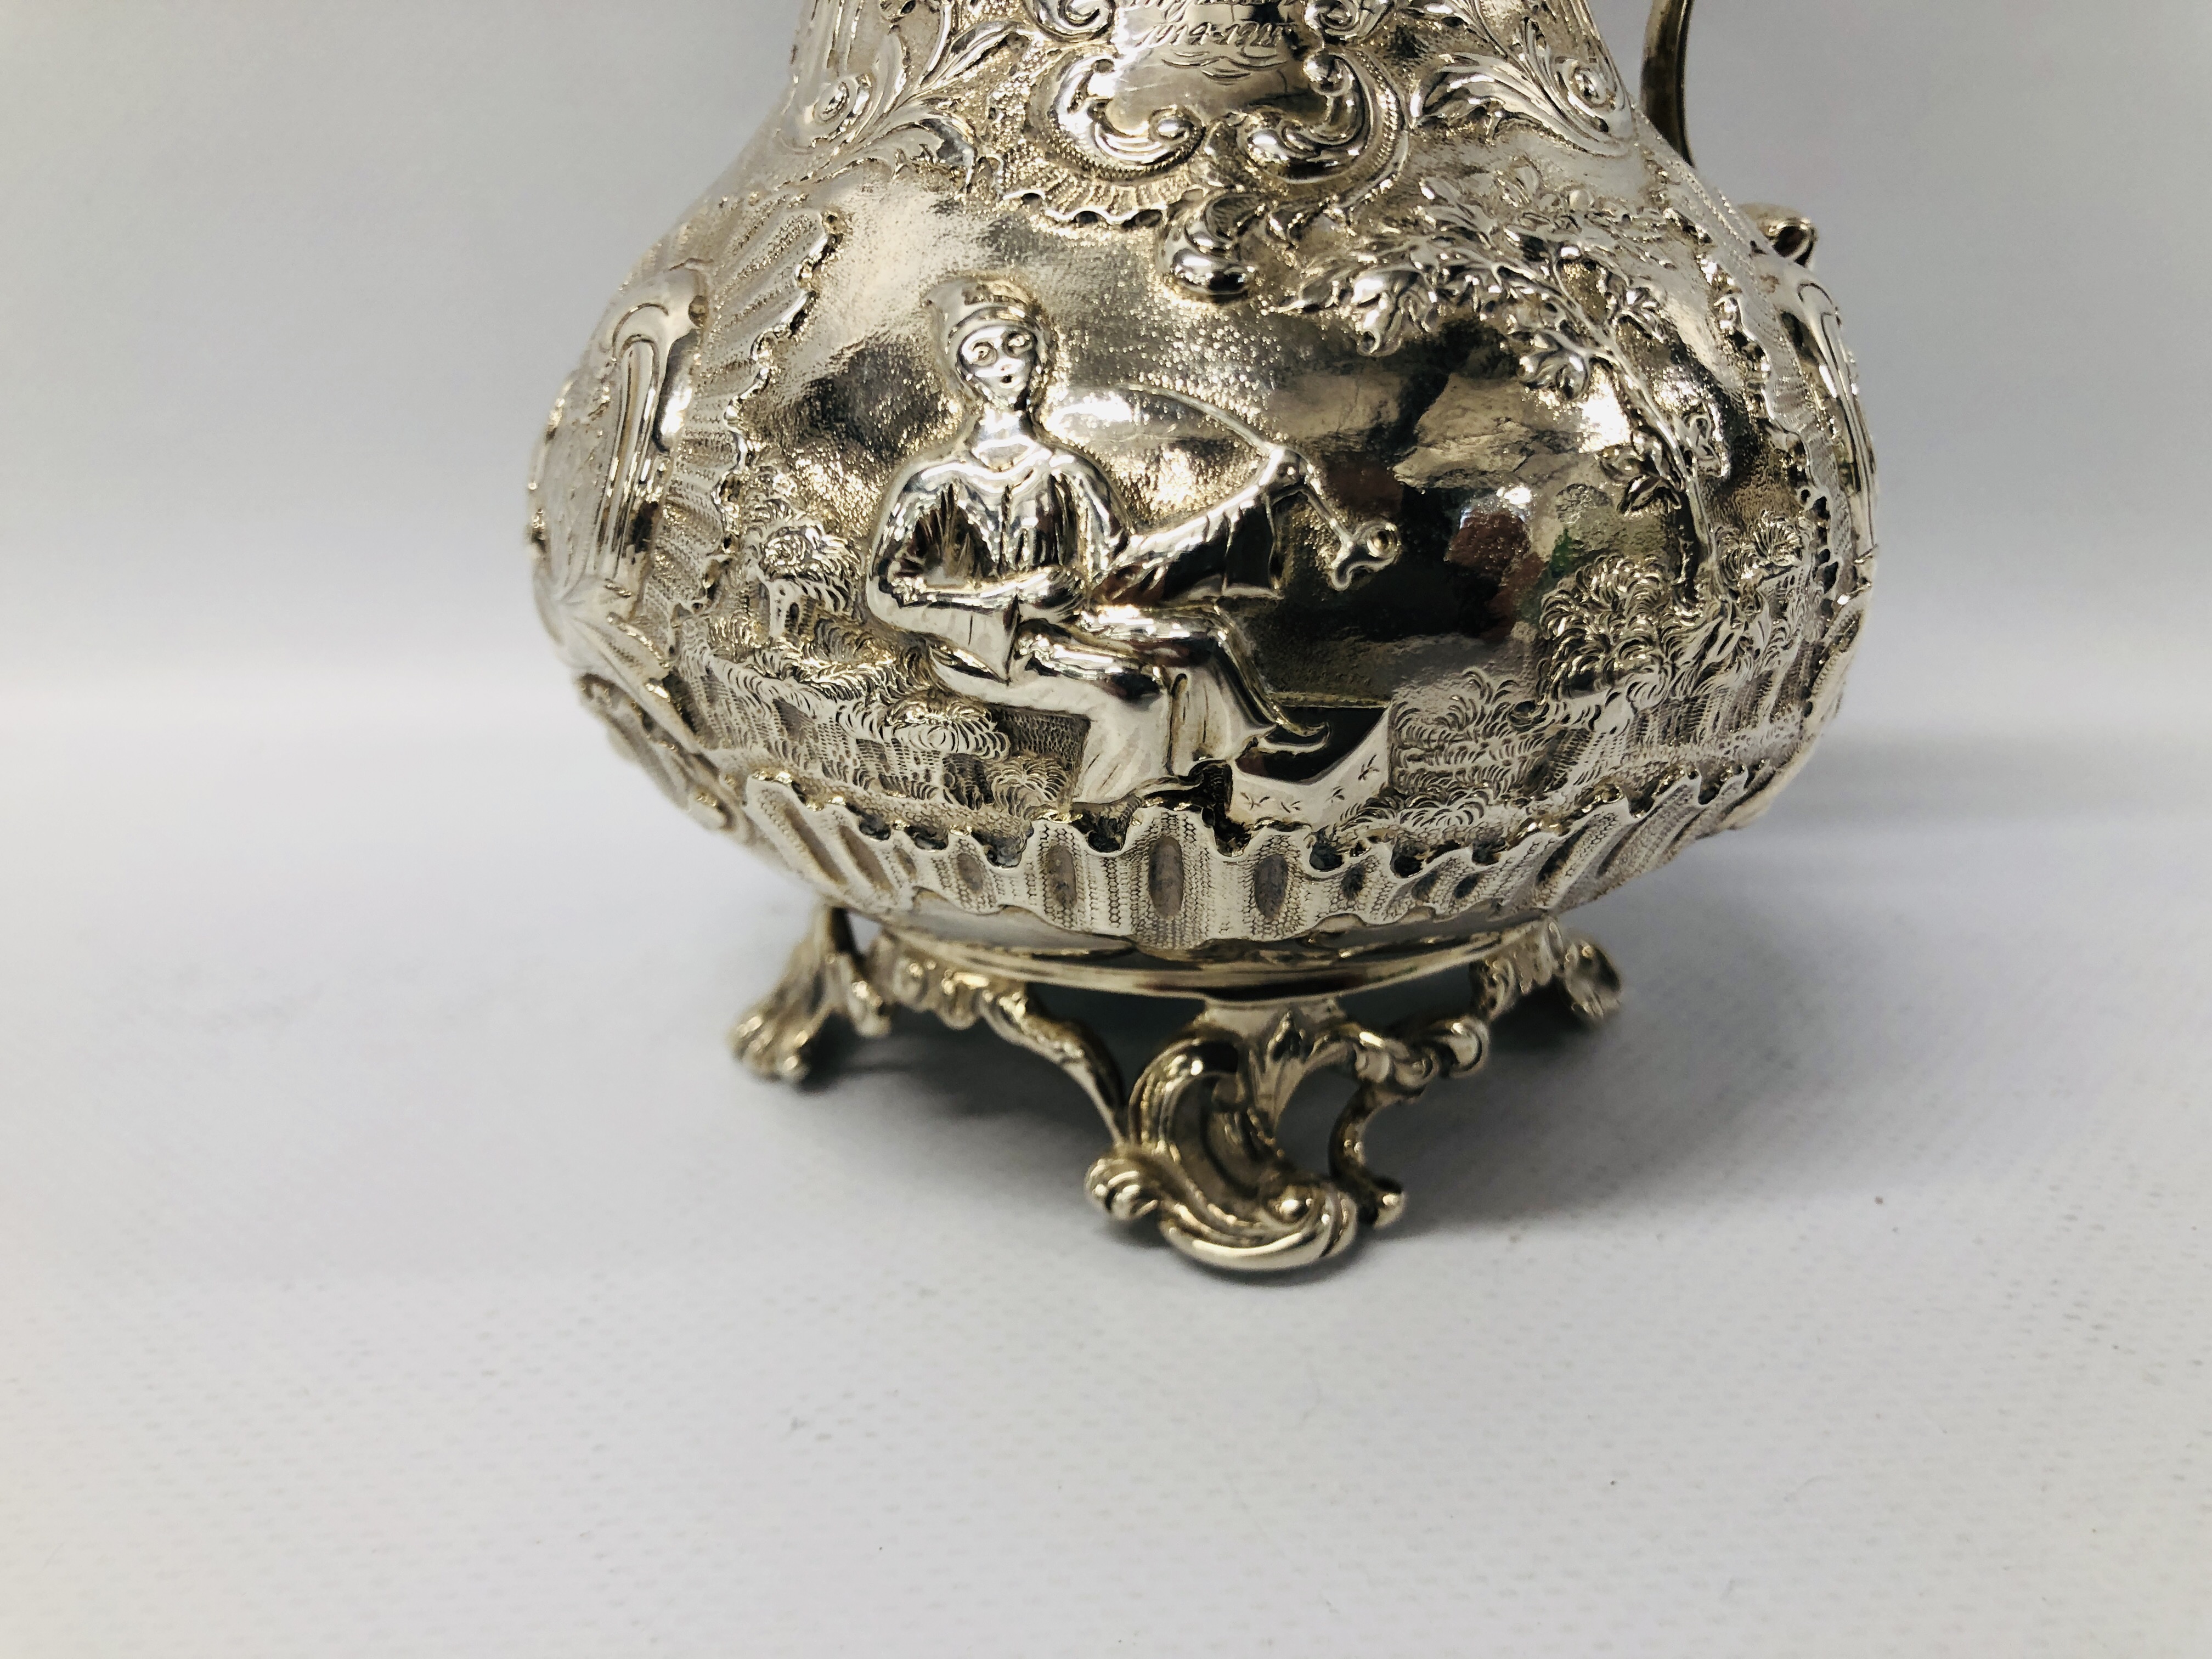 A SILVER MILK JUG OF ROCOCO DESIGN DECORATED WITH CHINOISERIE FIGURES WITH INSCRIPTION MR AND MRS J. - Image 6 of 25